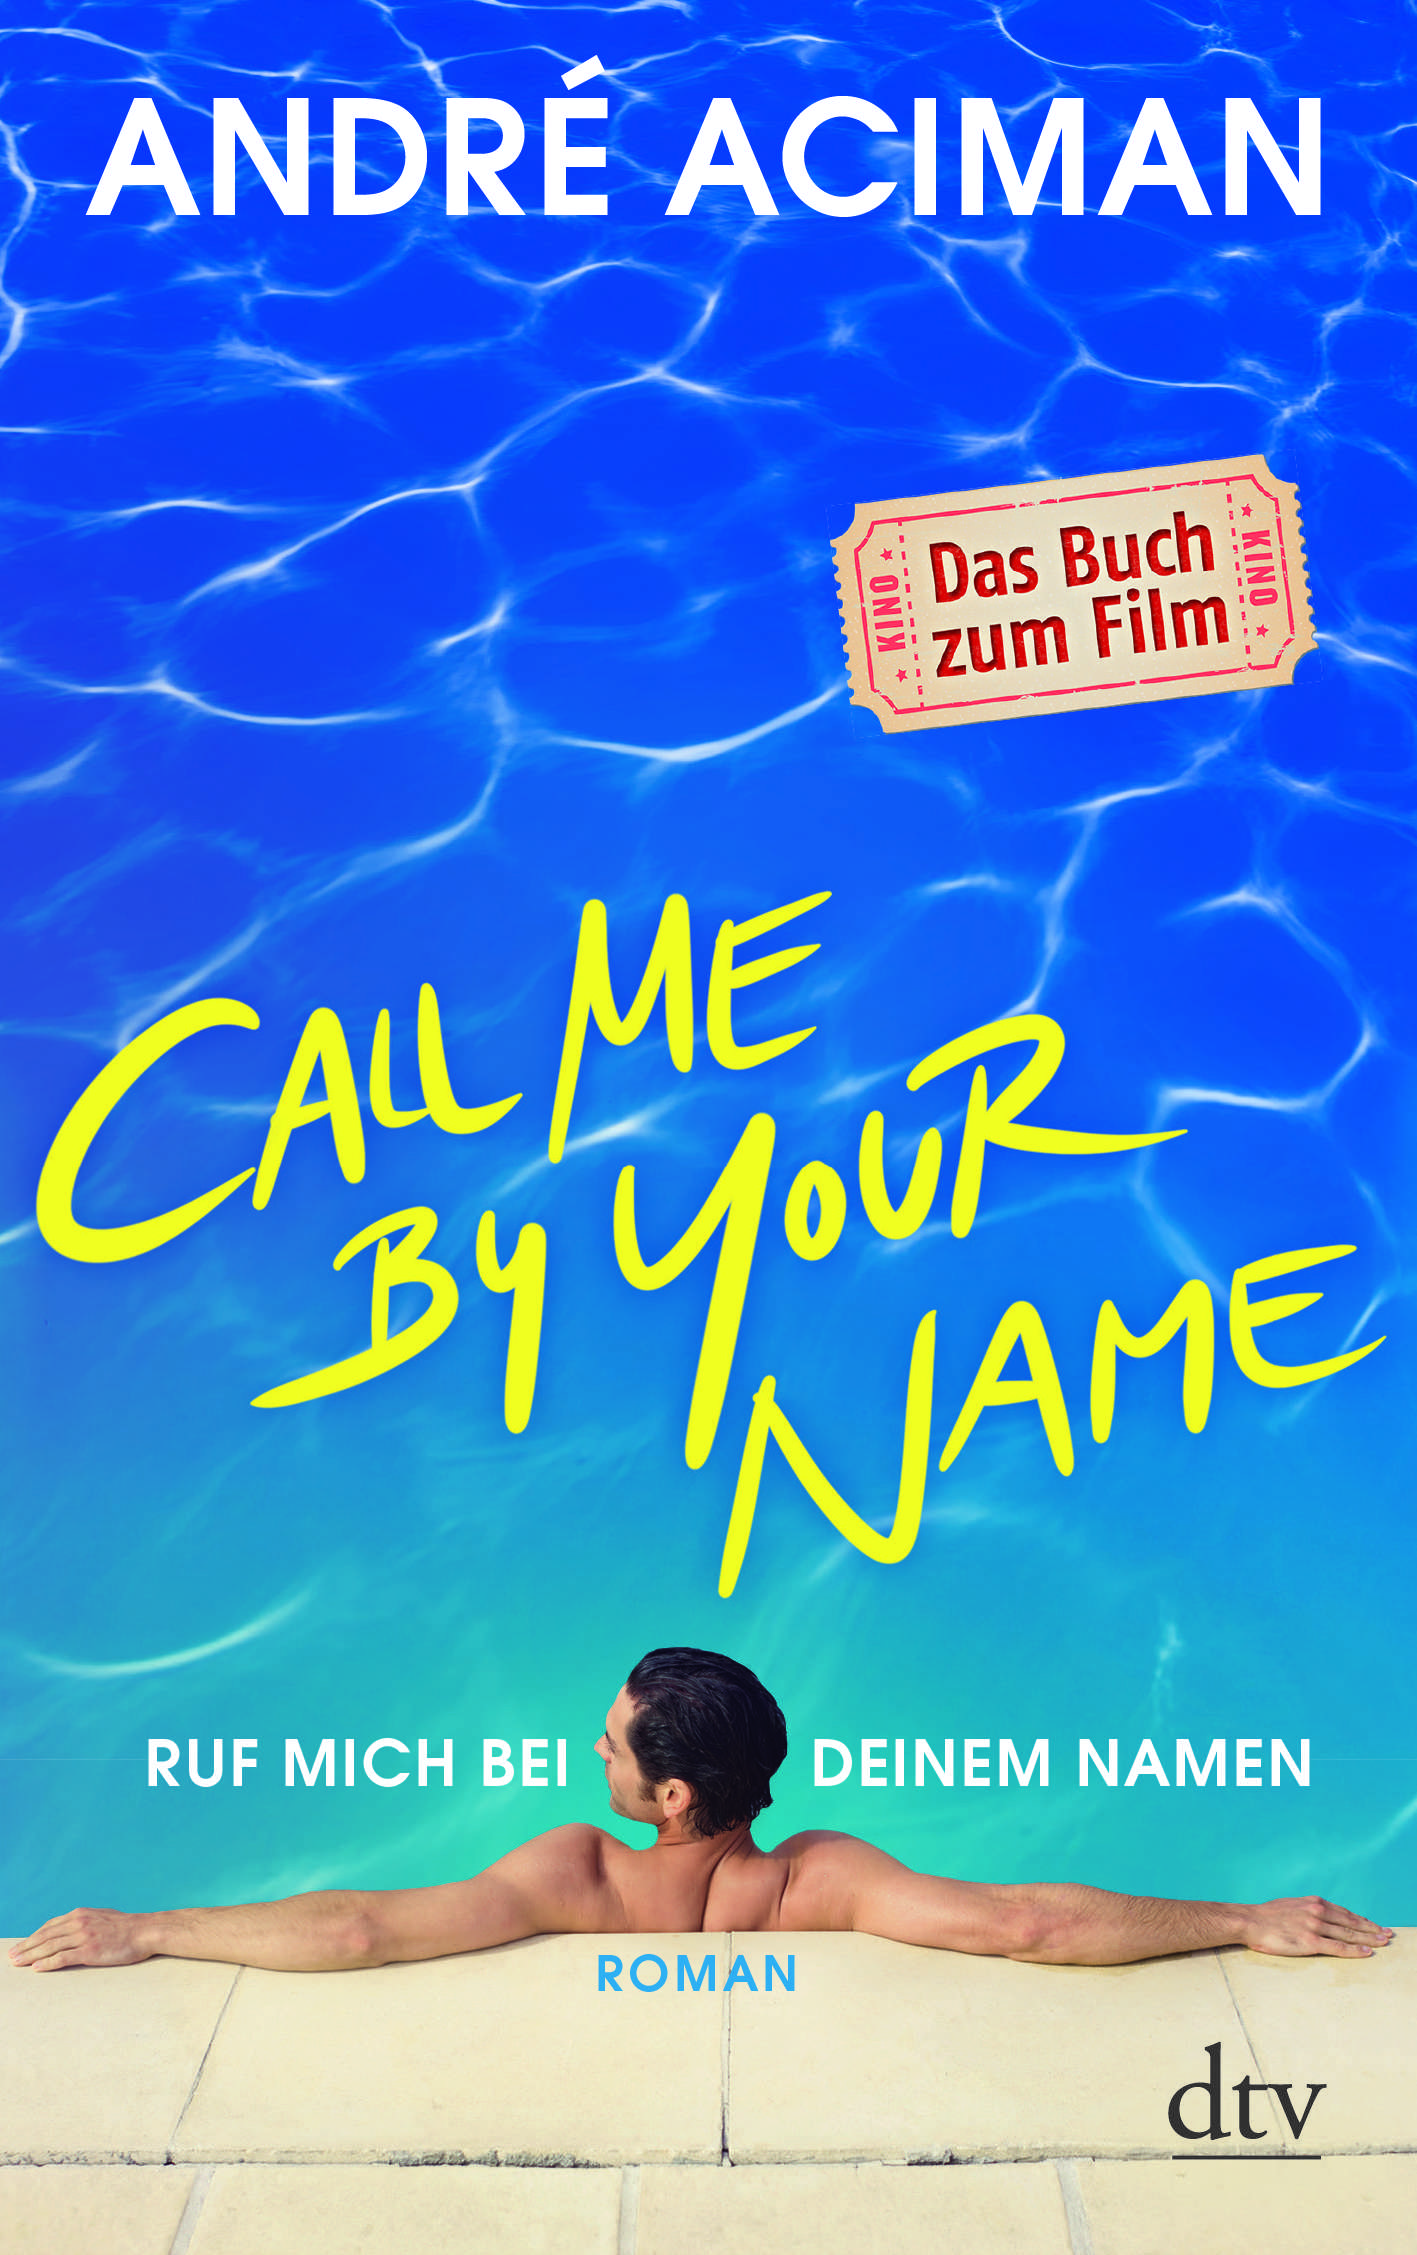 Call me by your name © dtv